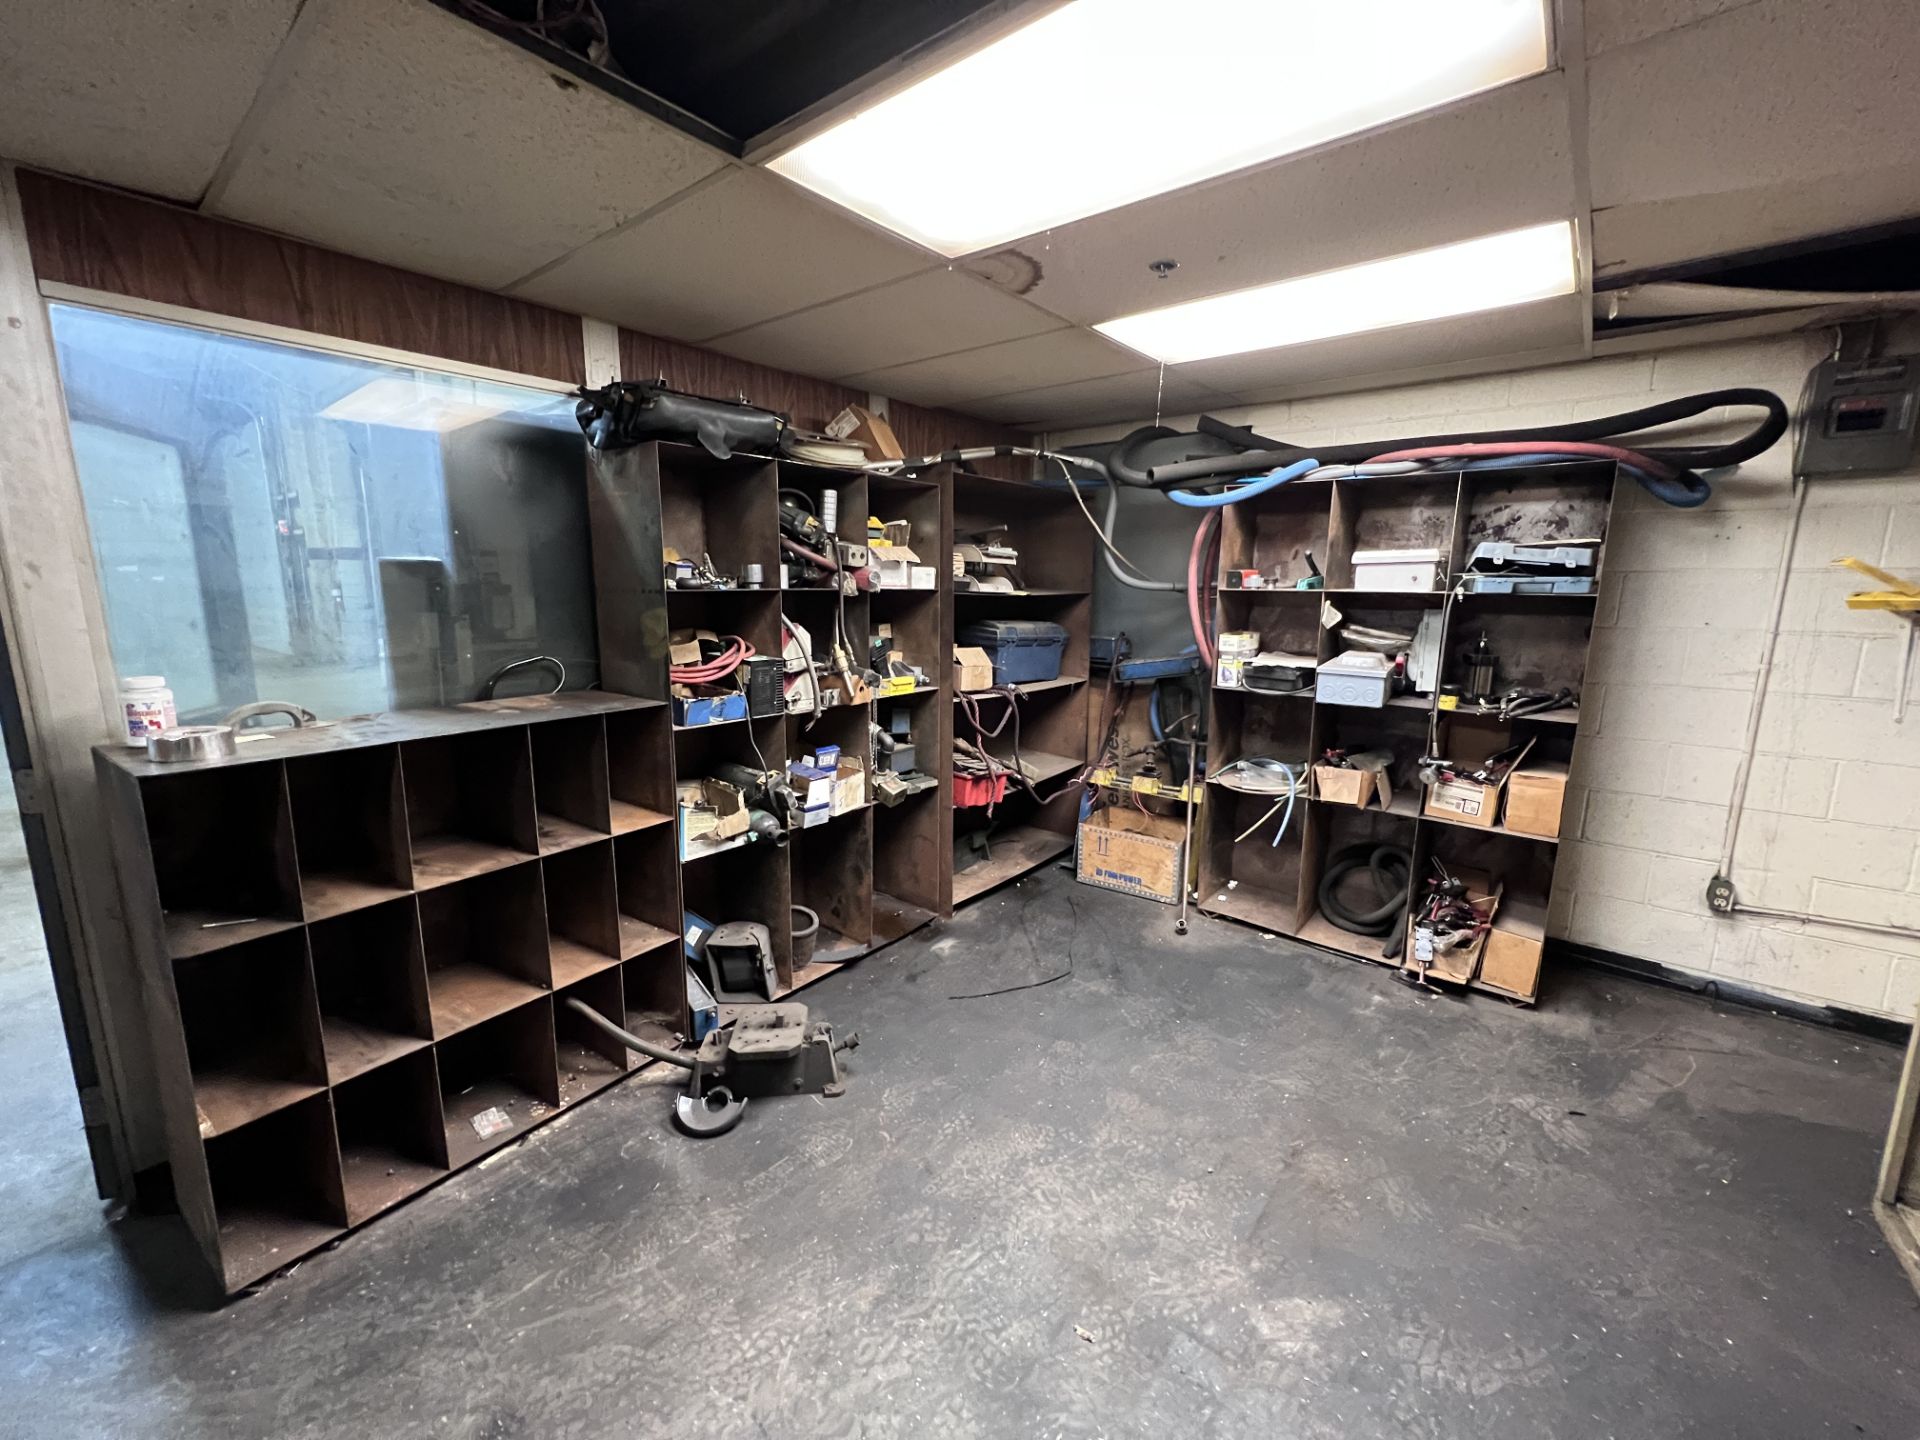 Lot - All Store Room Content - Image 2 of 3